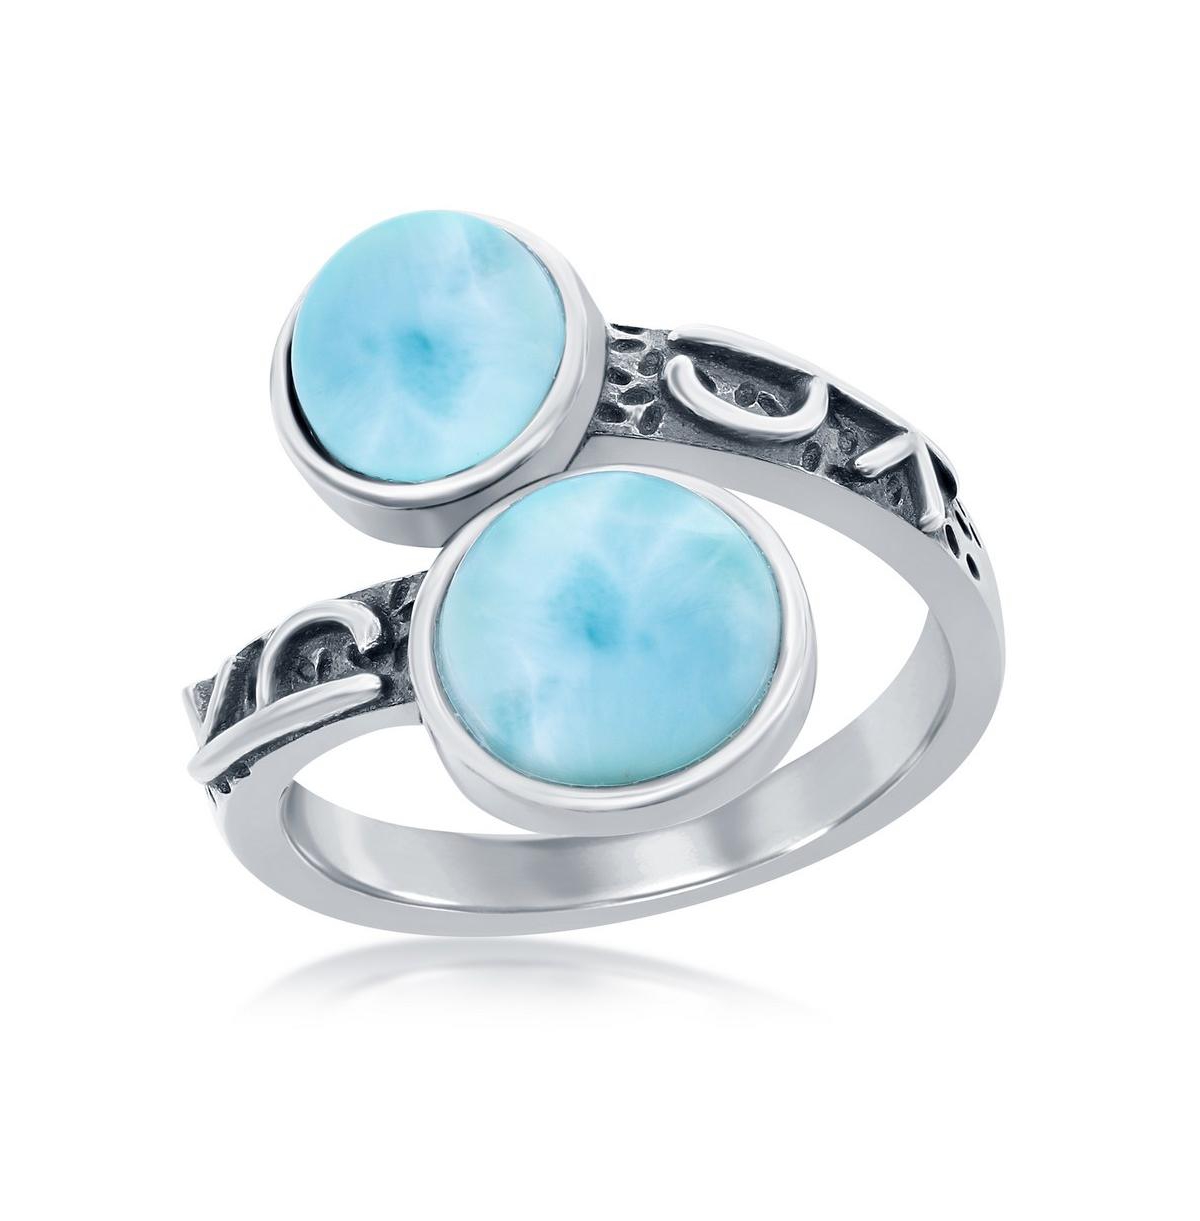 Sterling Silver Round Lairmar Designed Oxidized Bypass Ring - Blue